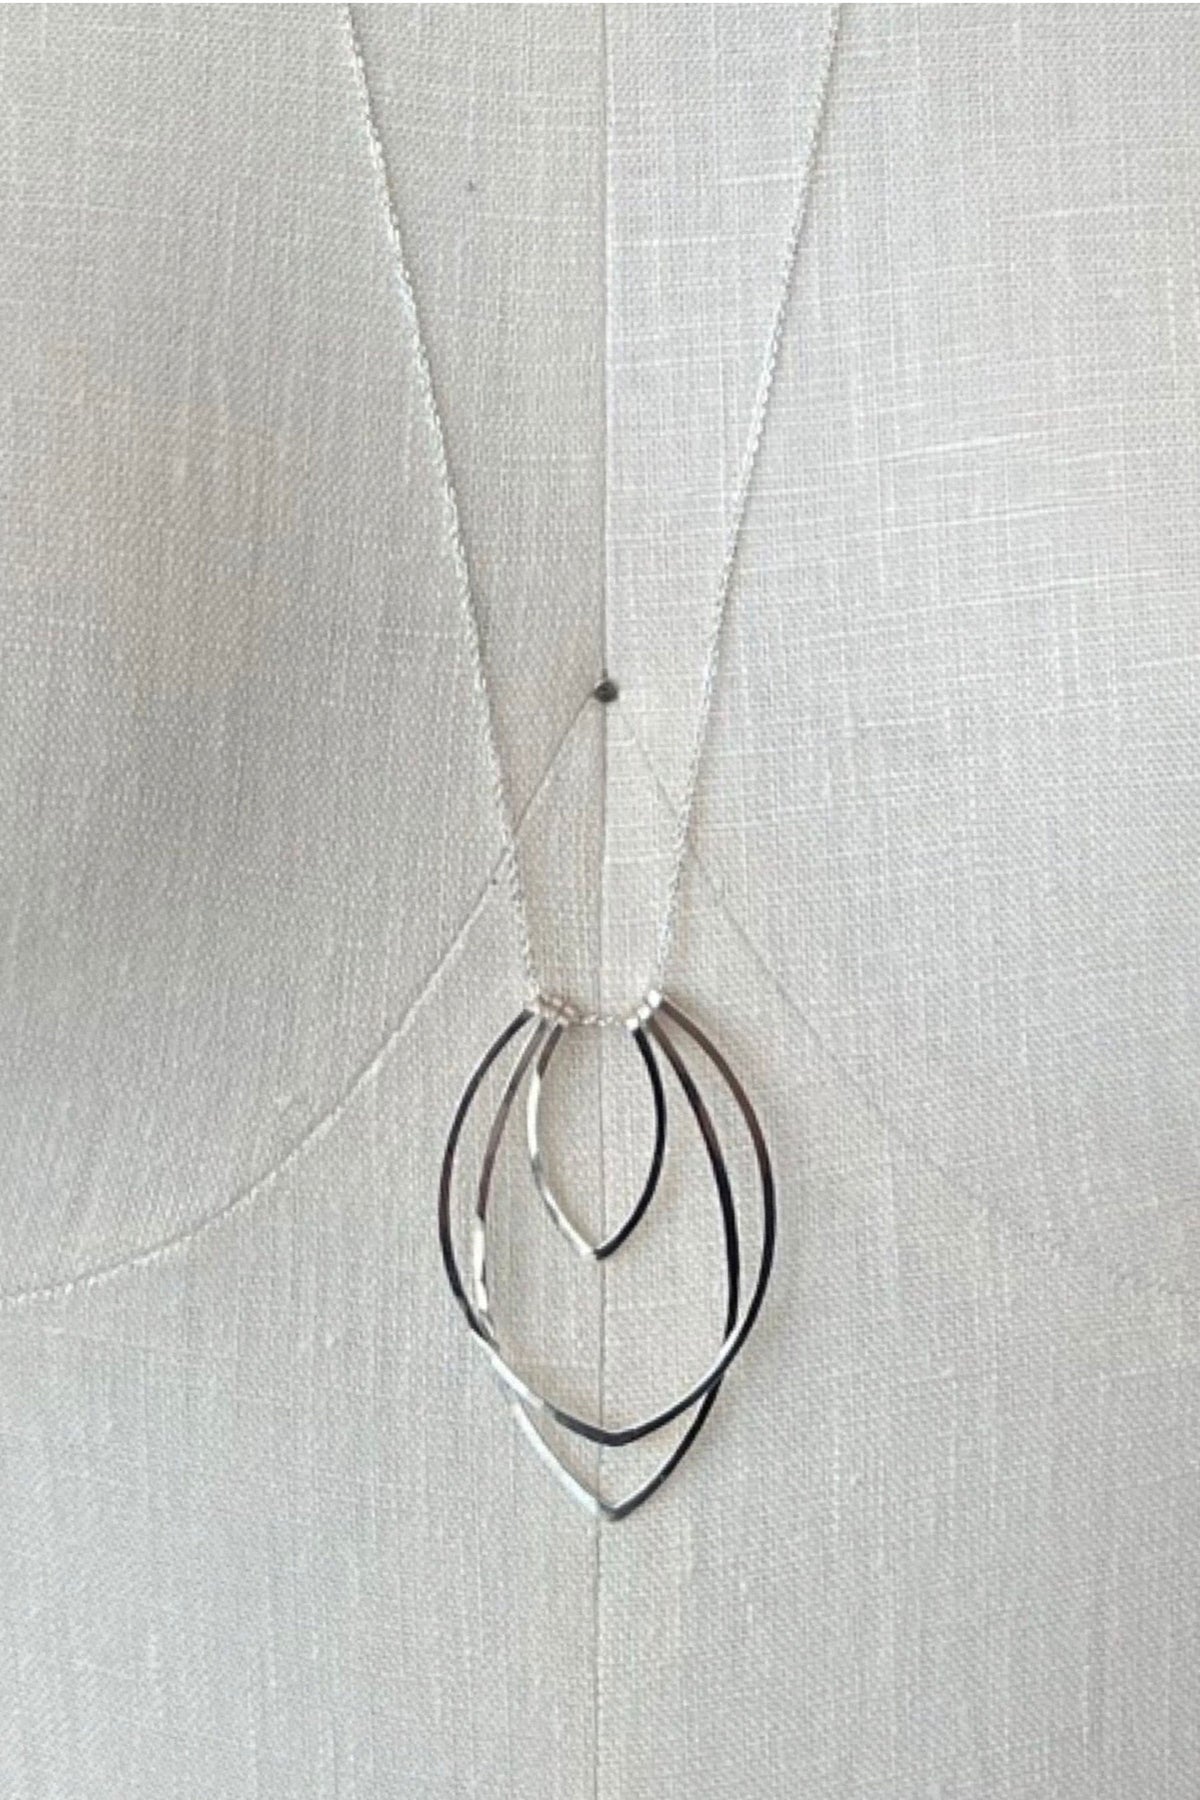 Large Flame Necklace | Sterling Silver